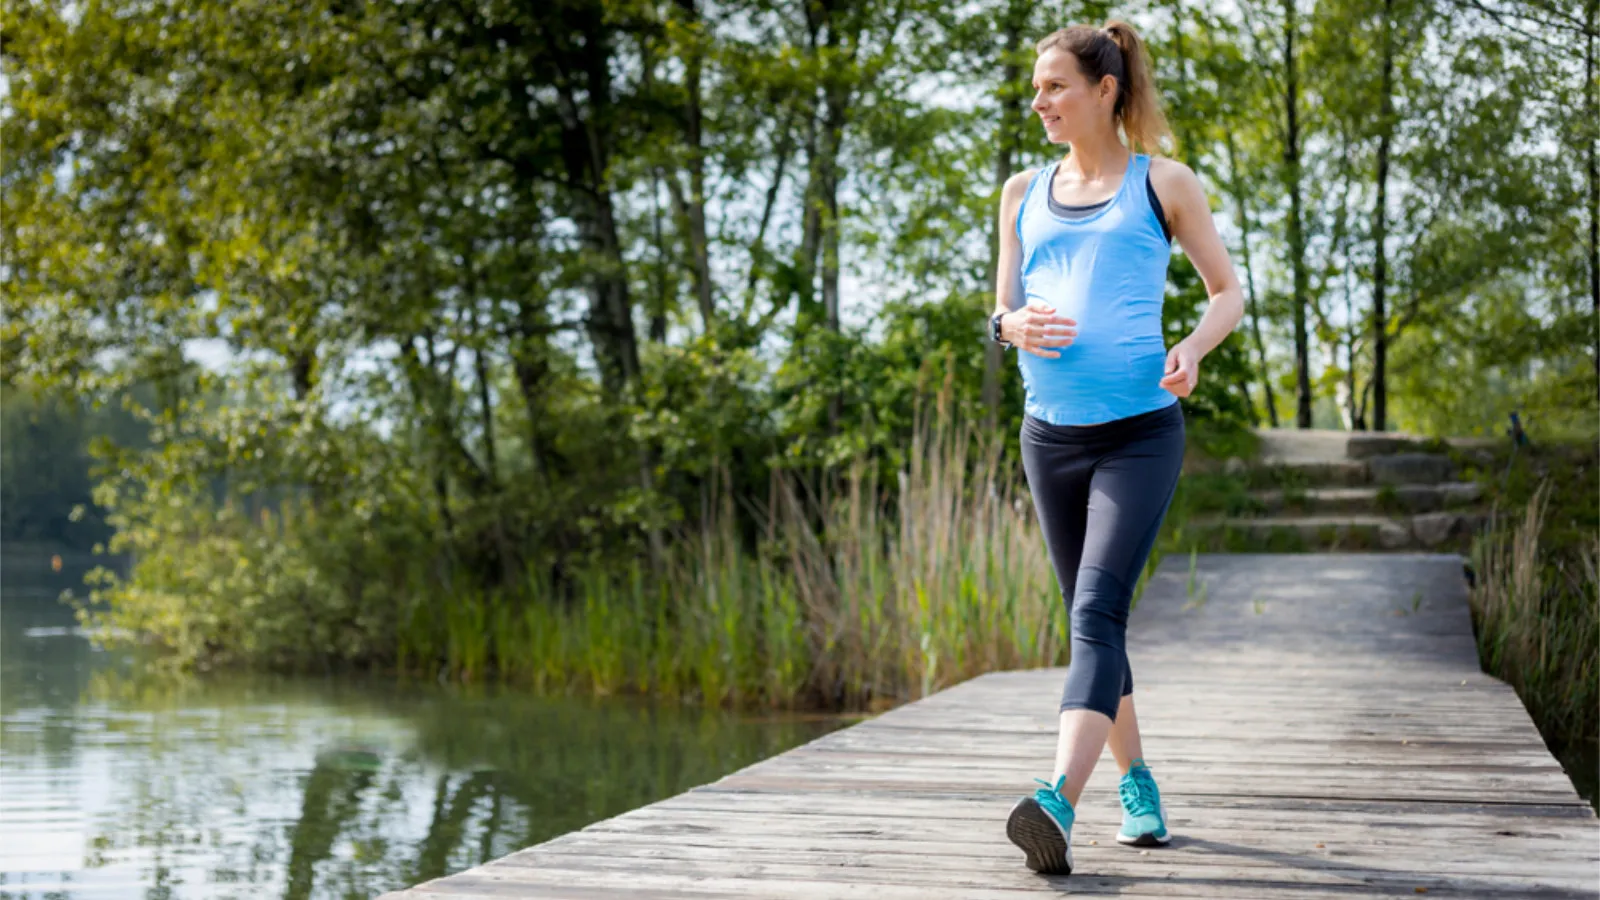 Why it’s safe to run & jog during pregnancy